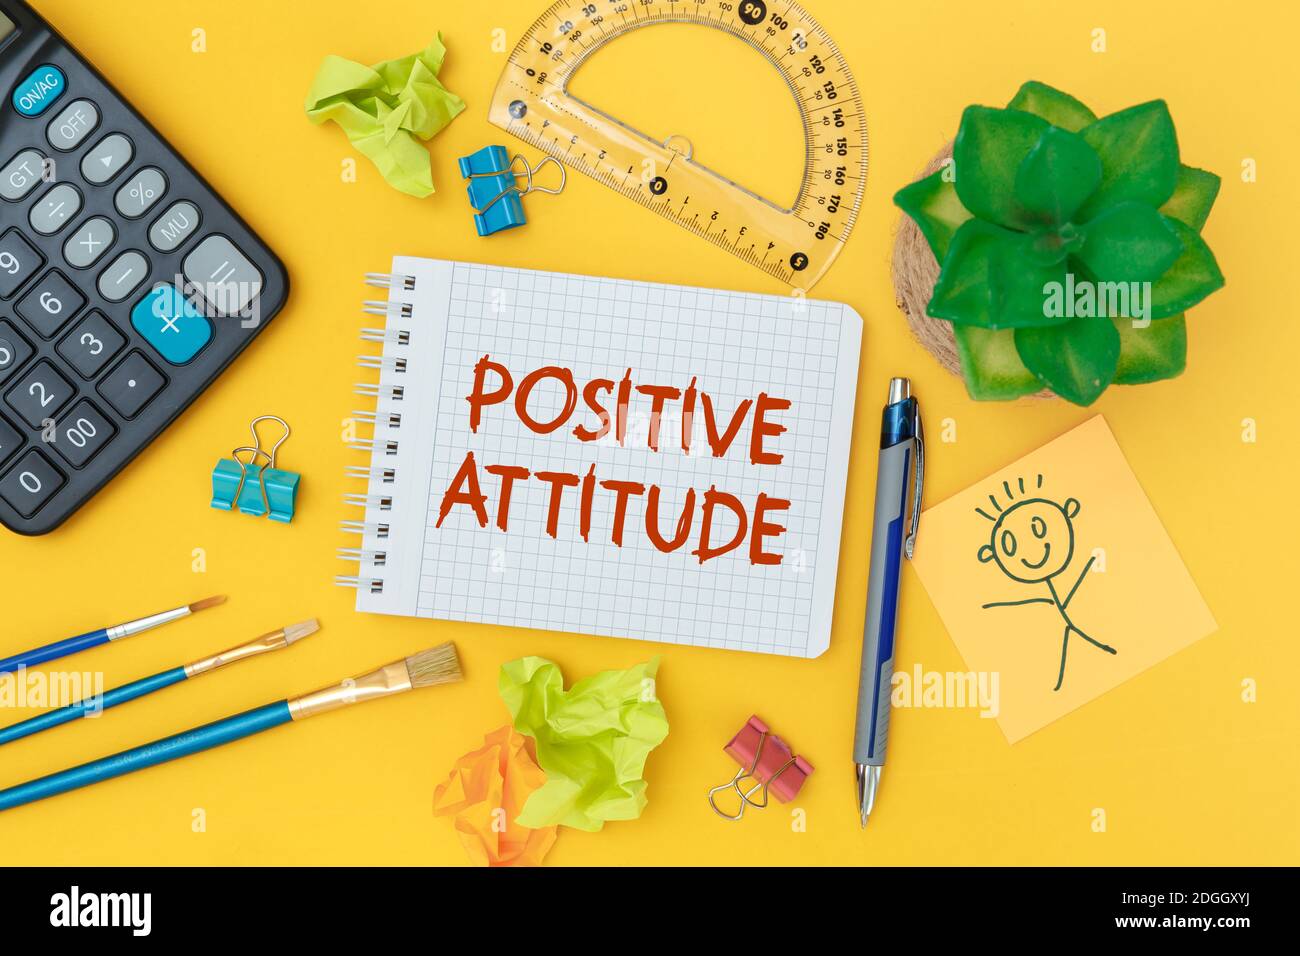 Positive Attitude. Inspirational quotes on notebook and office supplies Stock Photo